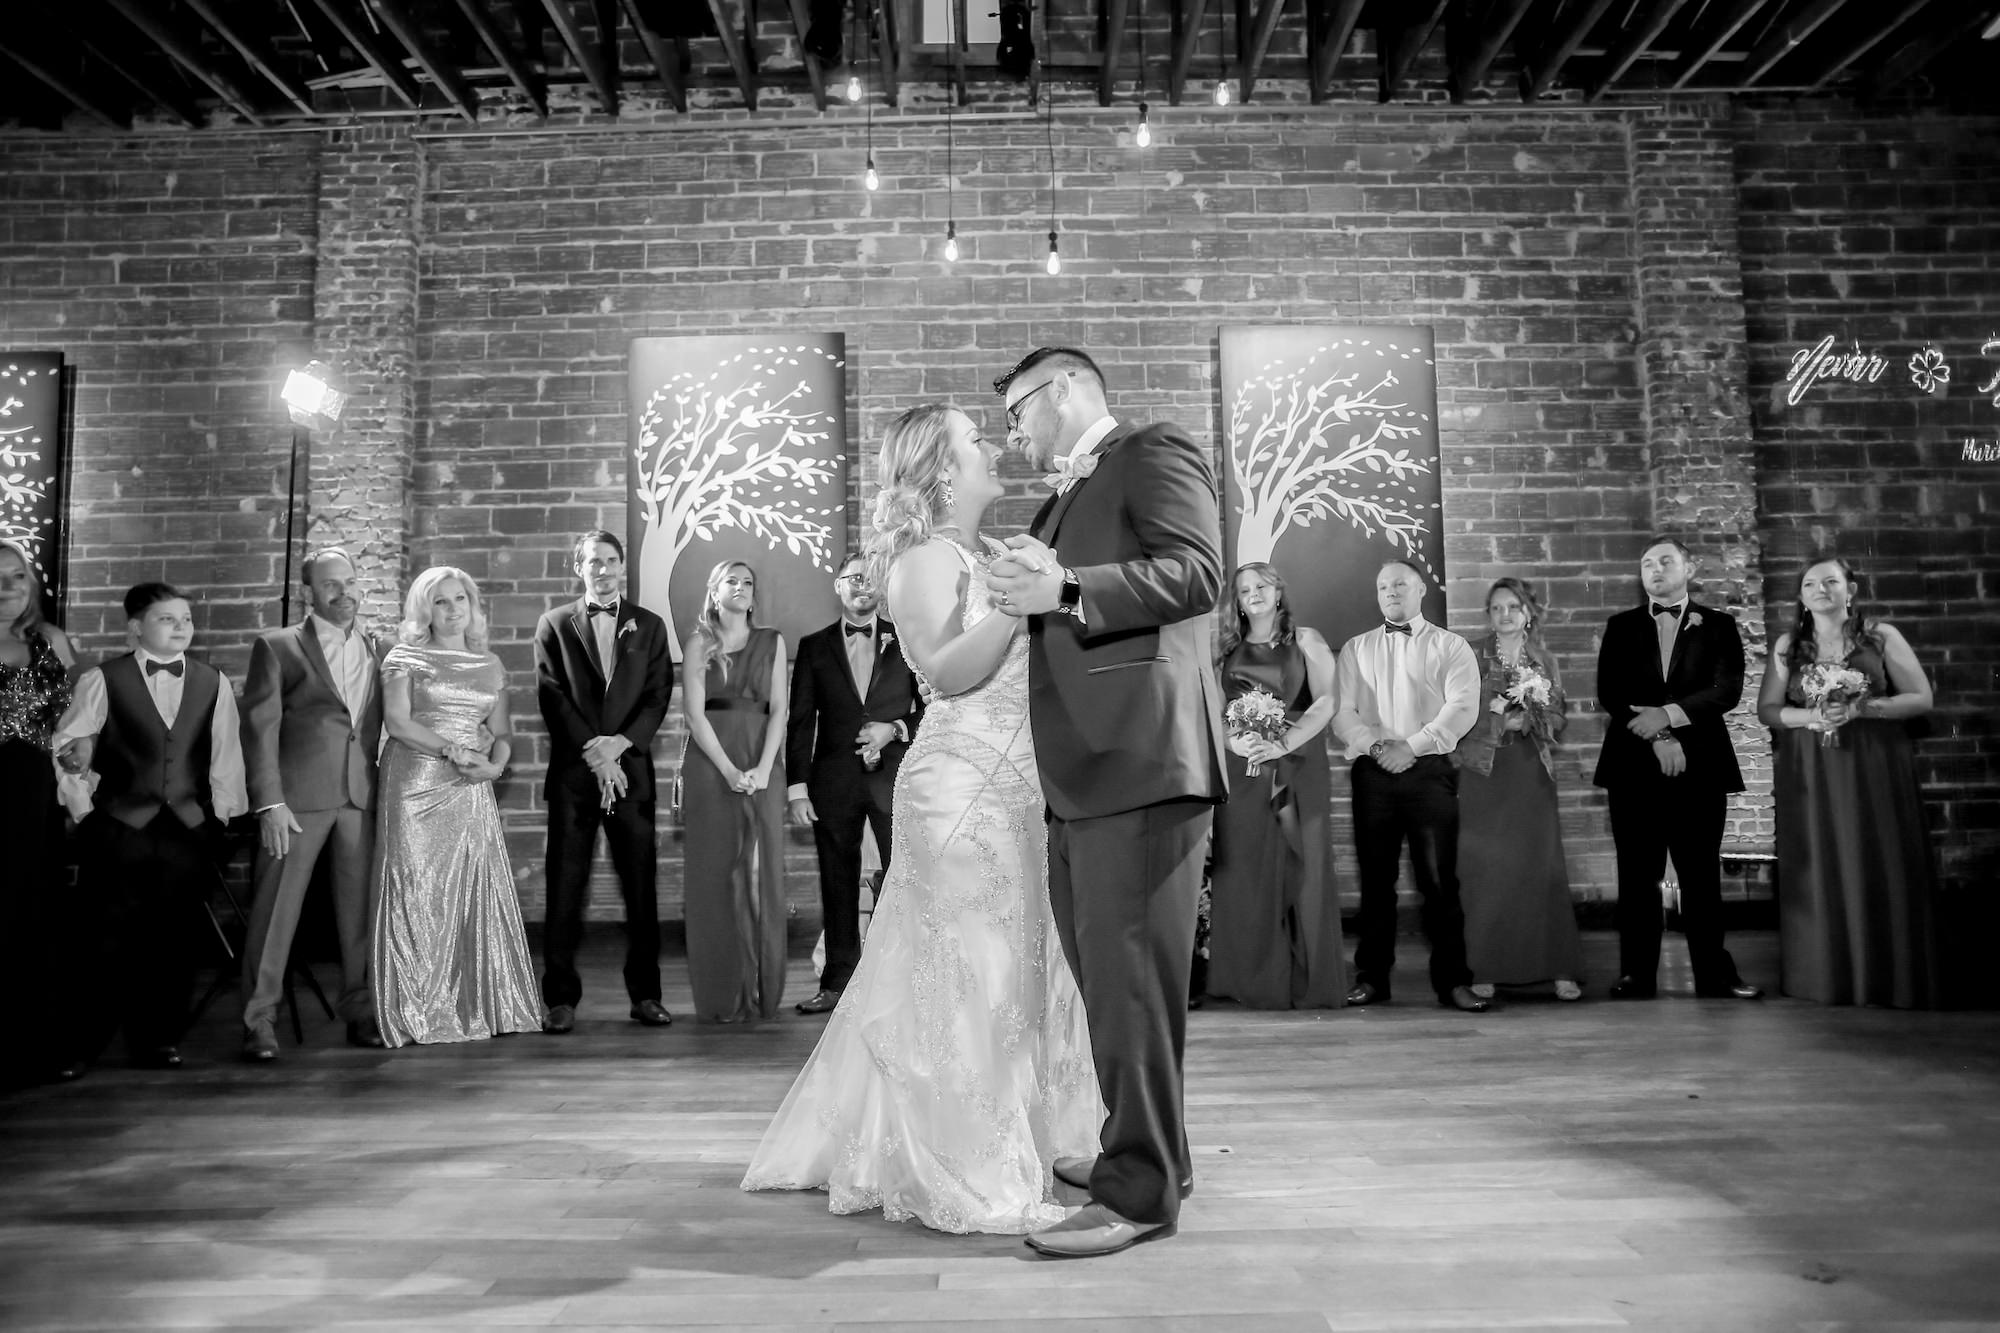 Florida Bride and Groom First Dance in the Center of Historic Wedding Venue with Exposed Brick Wall at NOVA 535